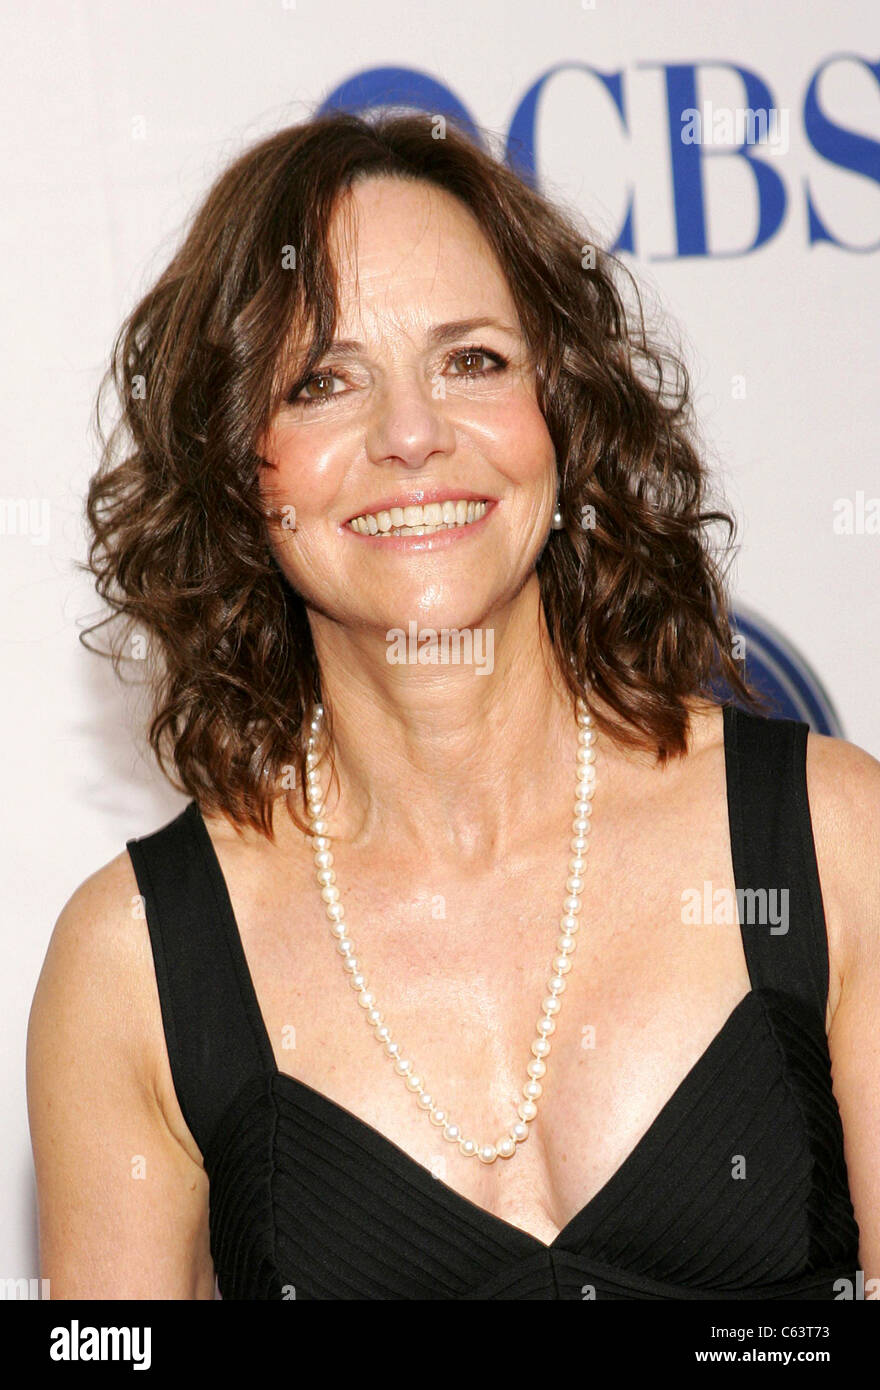 Sally Field at arrivals for American Theatre Wing’s Antoinette Perry 2005 Tony Awards, Radio City Music Hall, New York, NY, Sunday, June 05, 2005. Photo by: Gregorio Binuya/Everett Collection Stock Photo